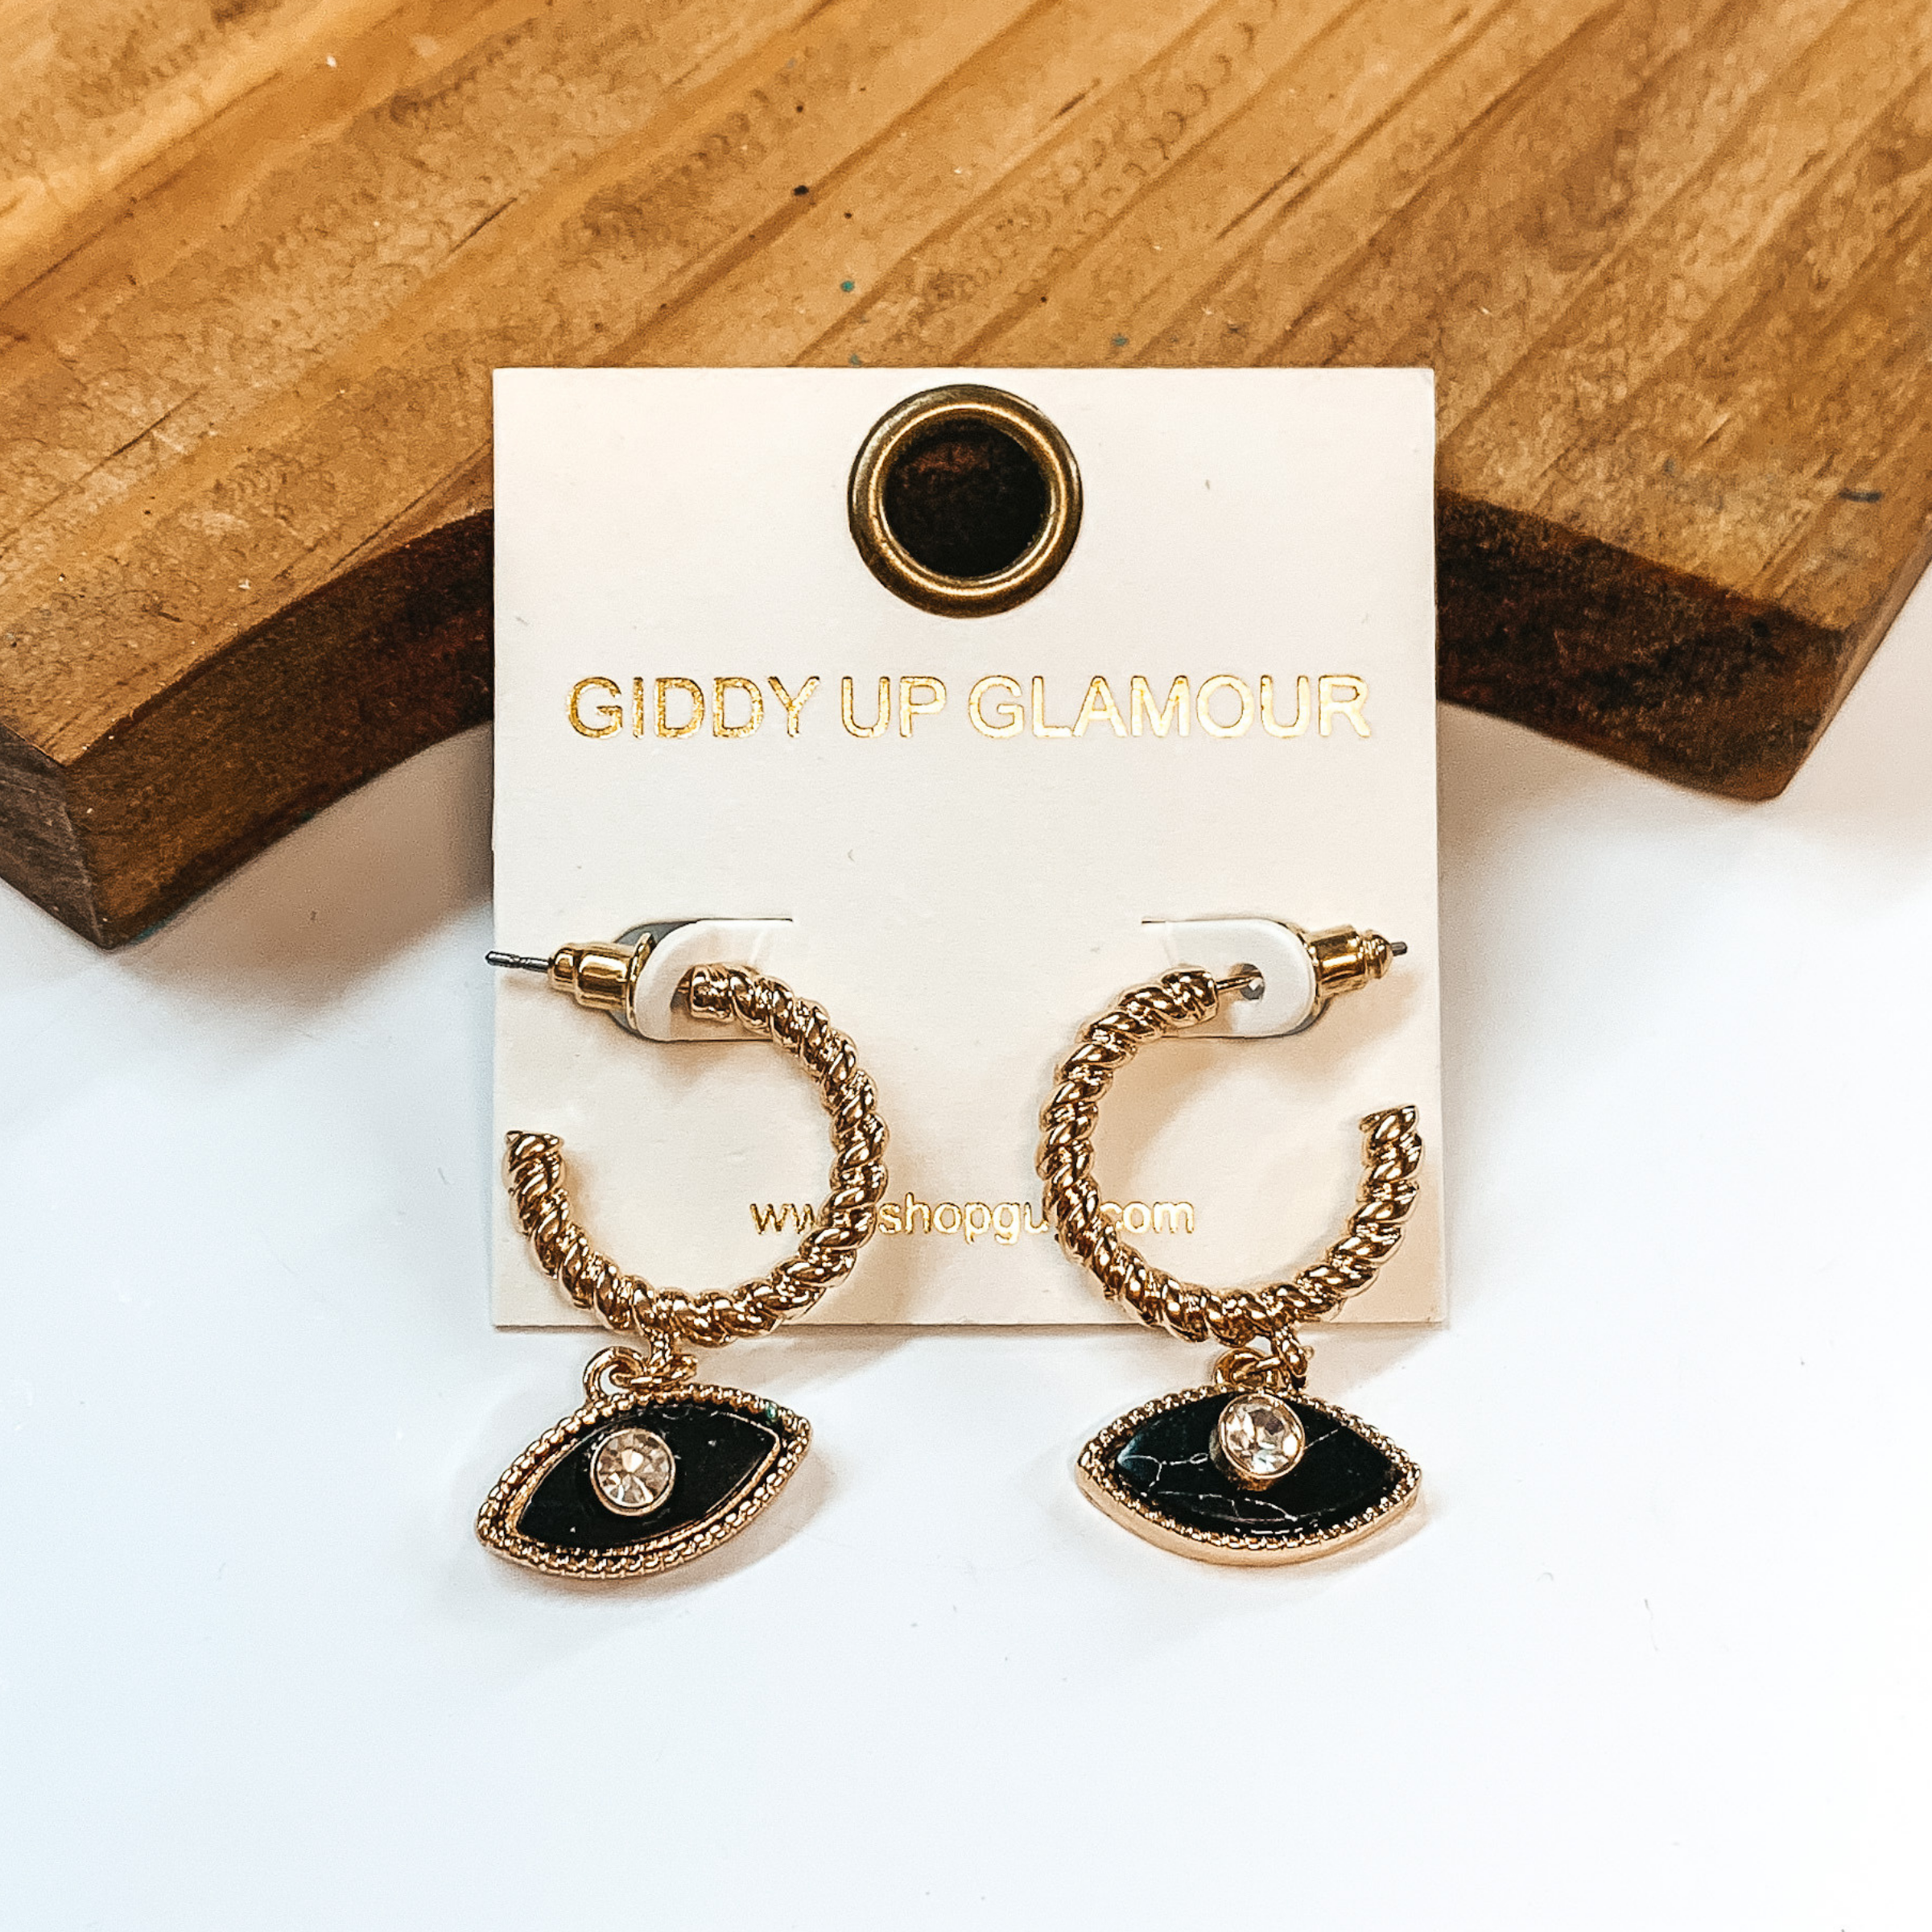 Small gold hoop earrings with a rope texture all  around. With a small evil eye pendant in black marble with a cz crystal in the middle, outlined in gold. Taken on a white background and a brown block in  the back.